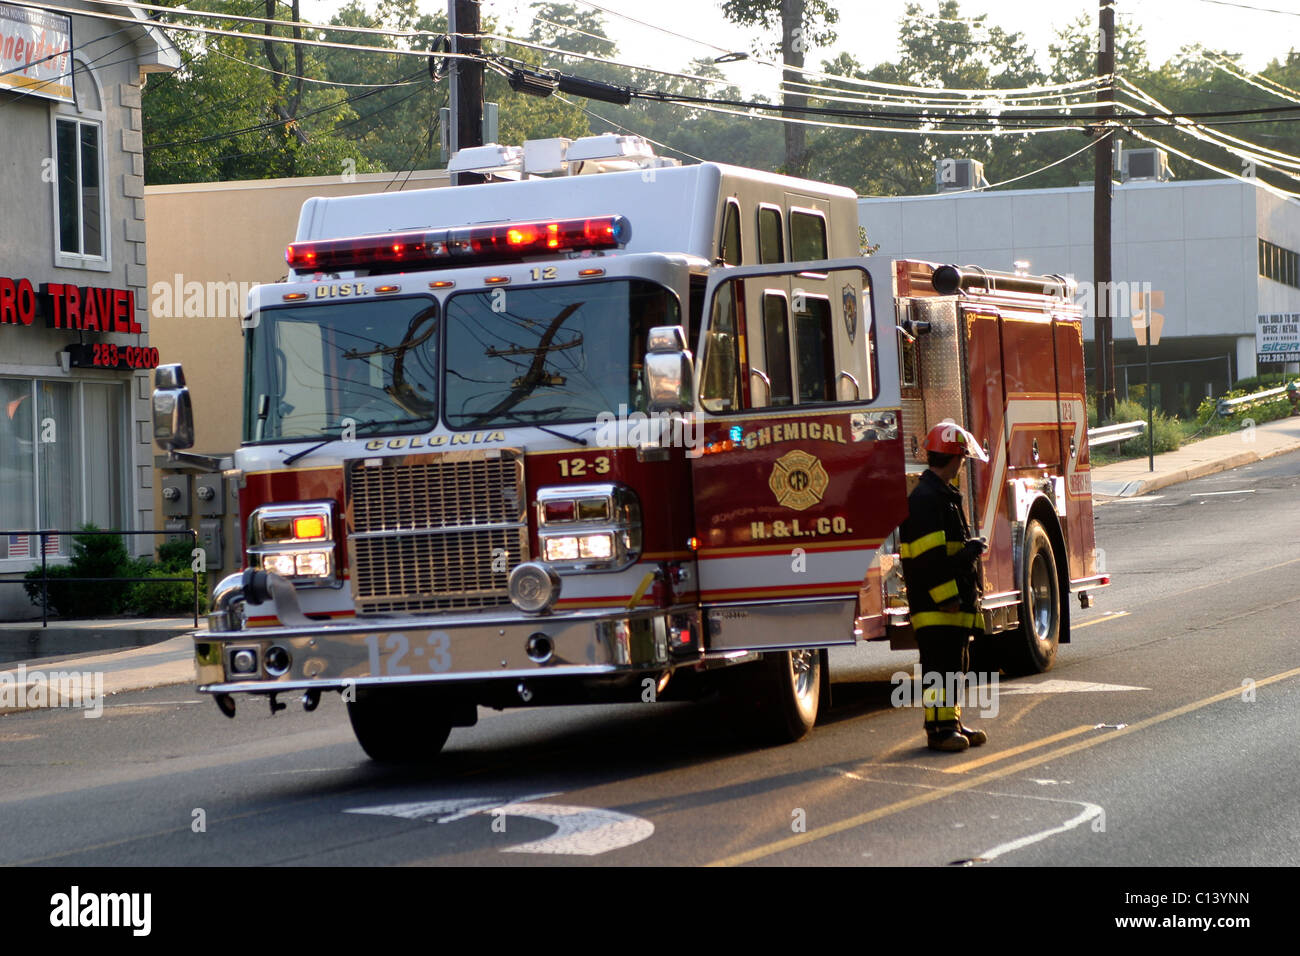 2003 E-One/Spartan Colonia Fire Department Engine 12-3 Stock Photo - Alamy